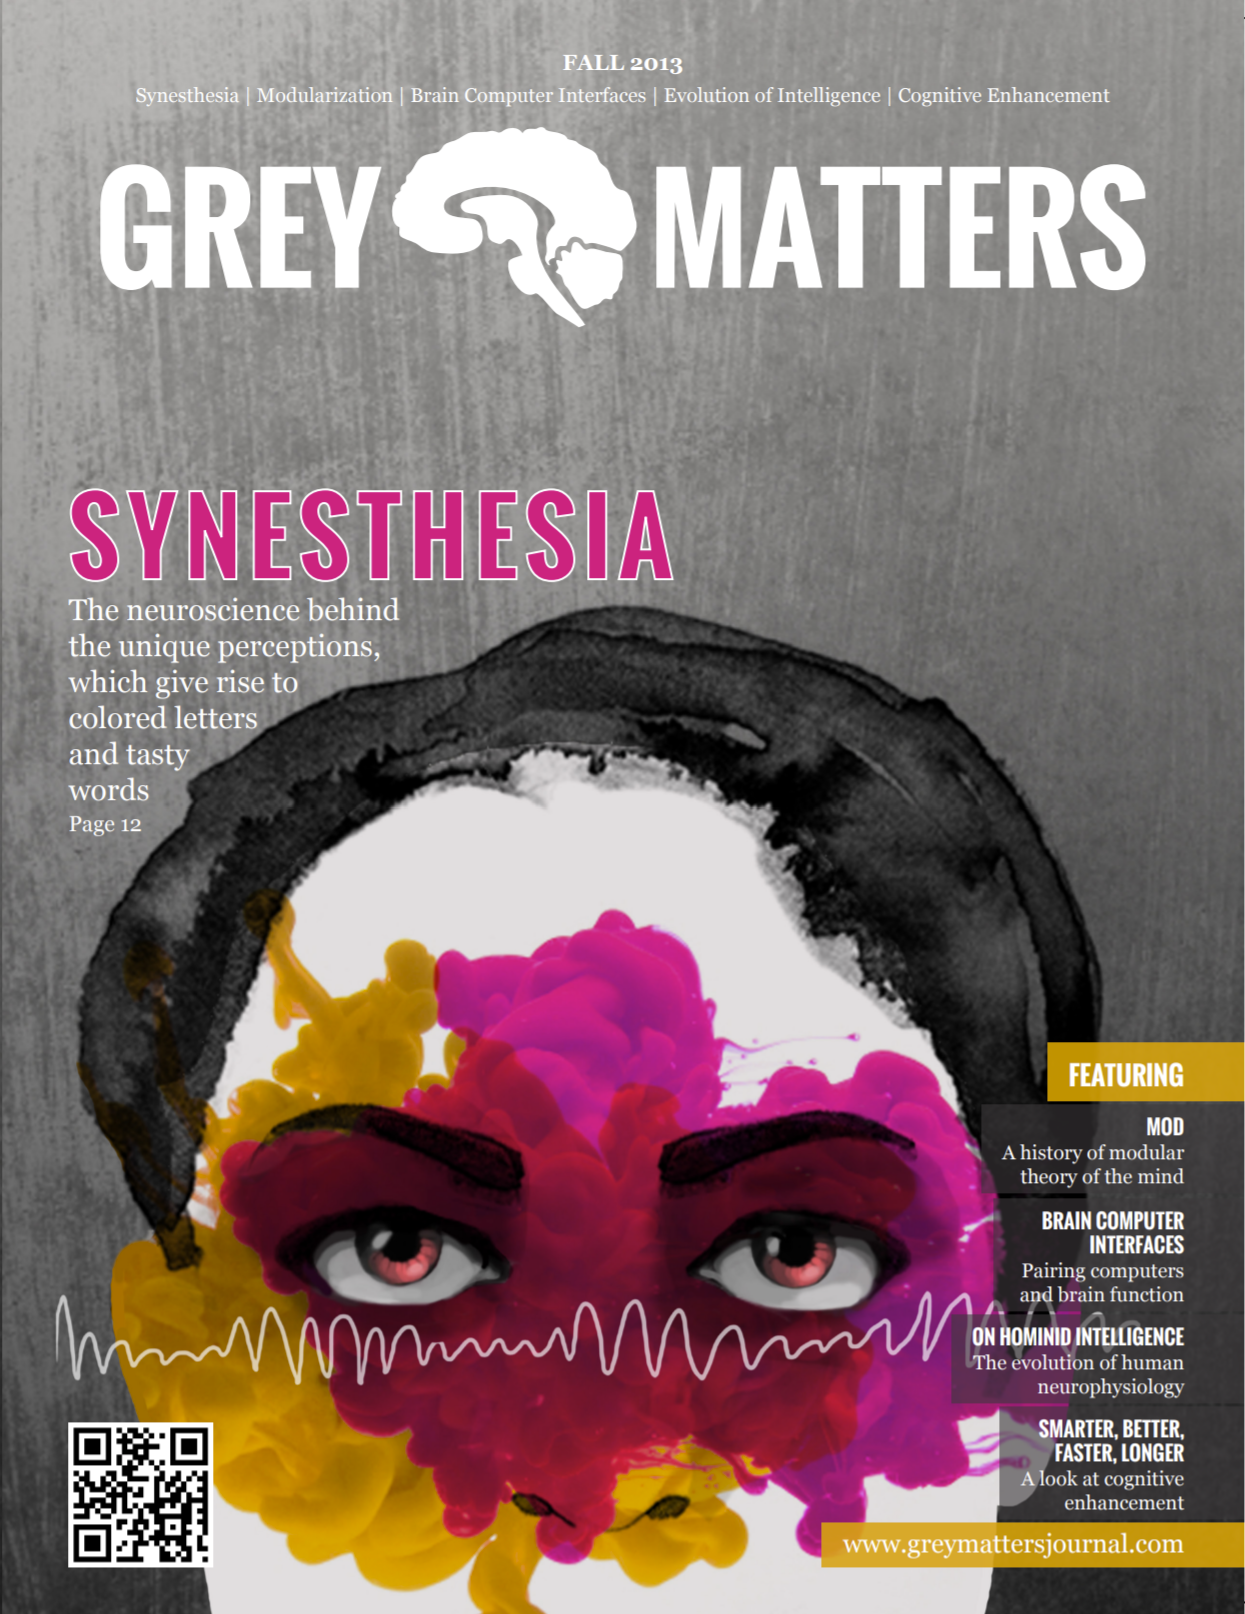 Grey Matters Journal Issue 1